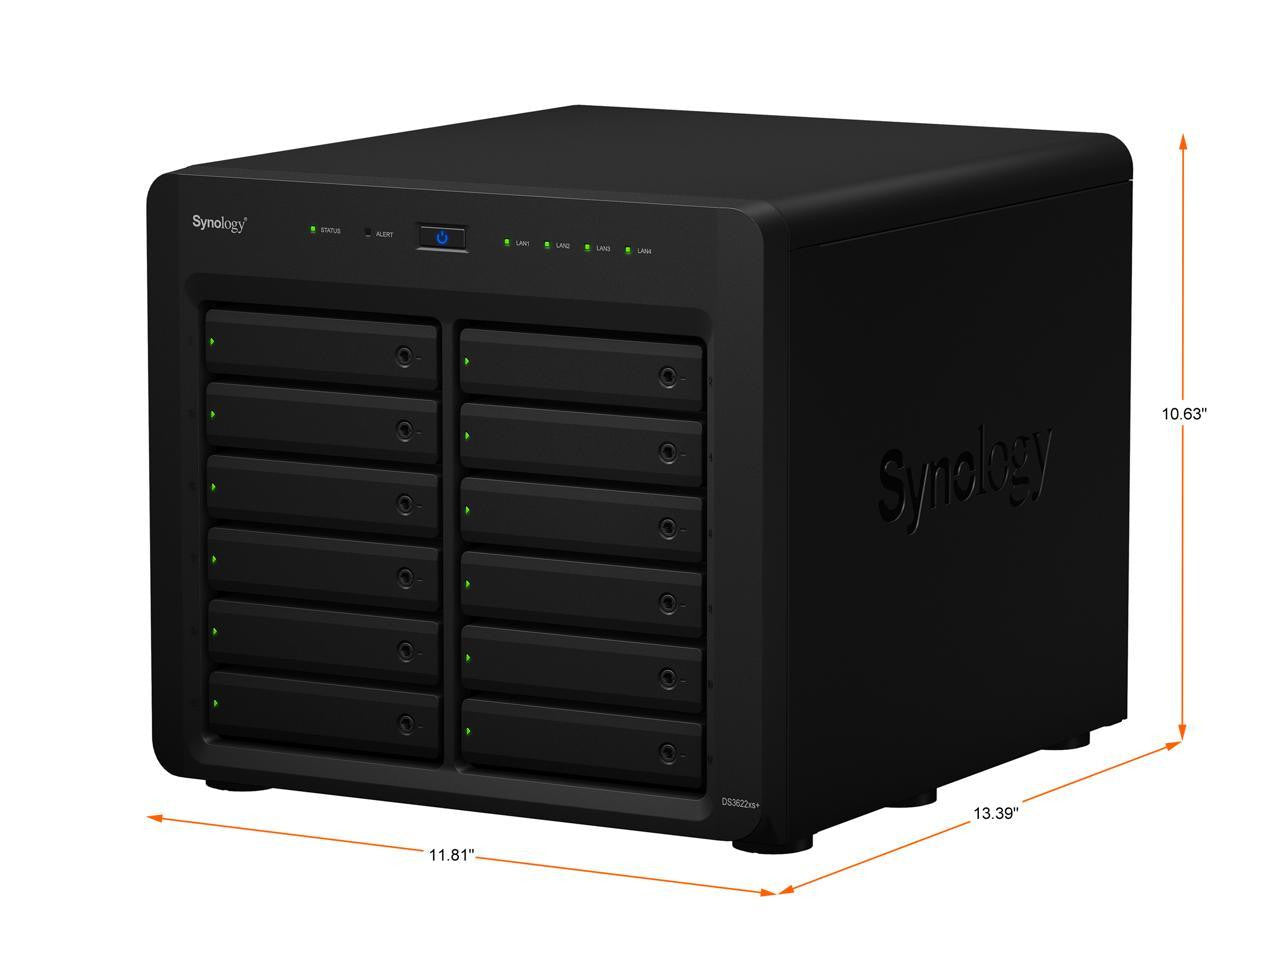 DS3622xs+ 12-BAY DiskStation with 32GB RAM and 216TB (12 x 18TB) of Synology Enterprise Drives